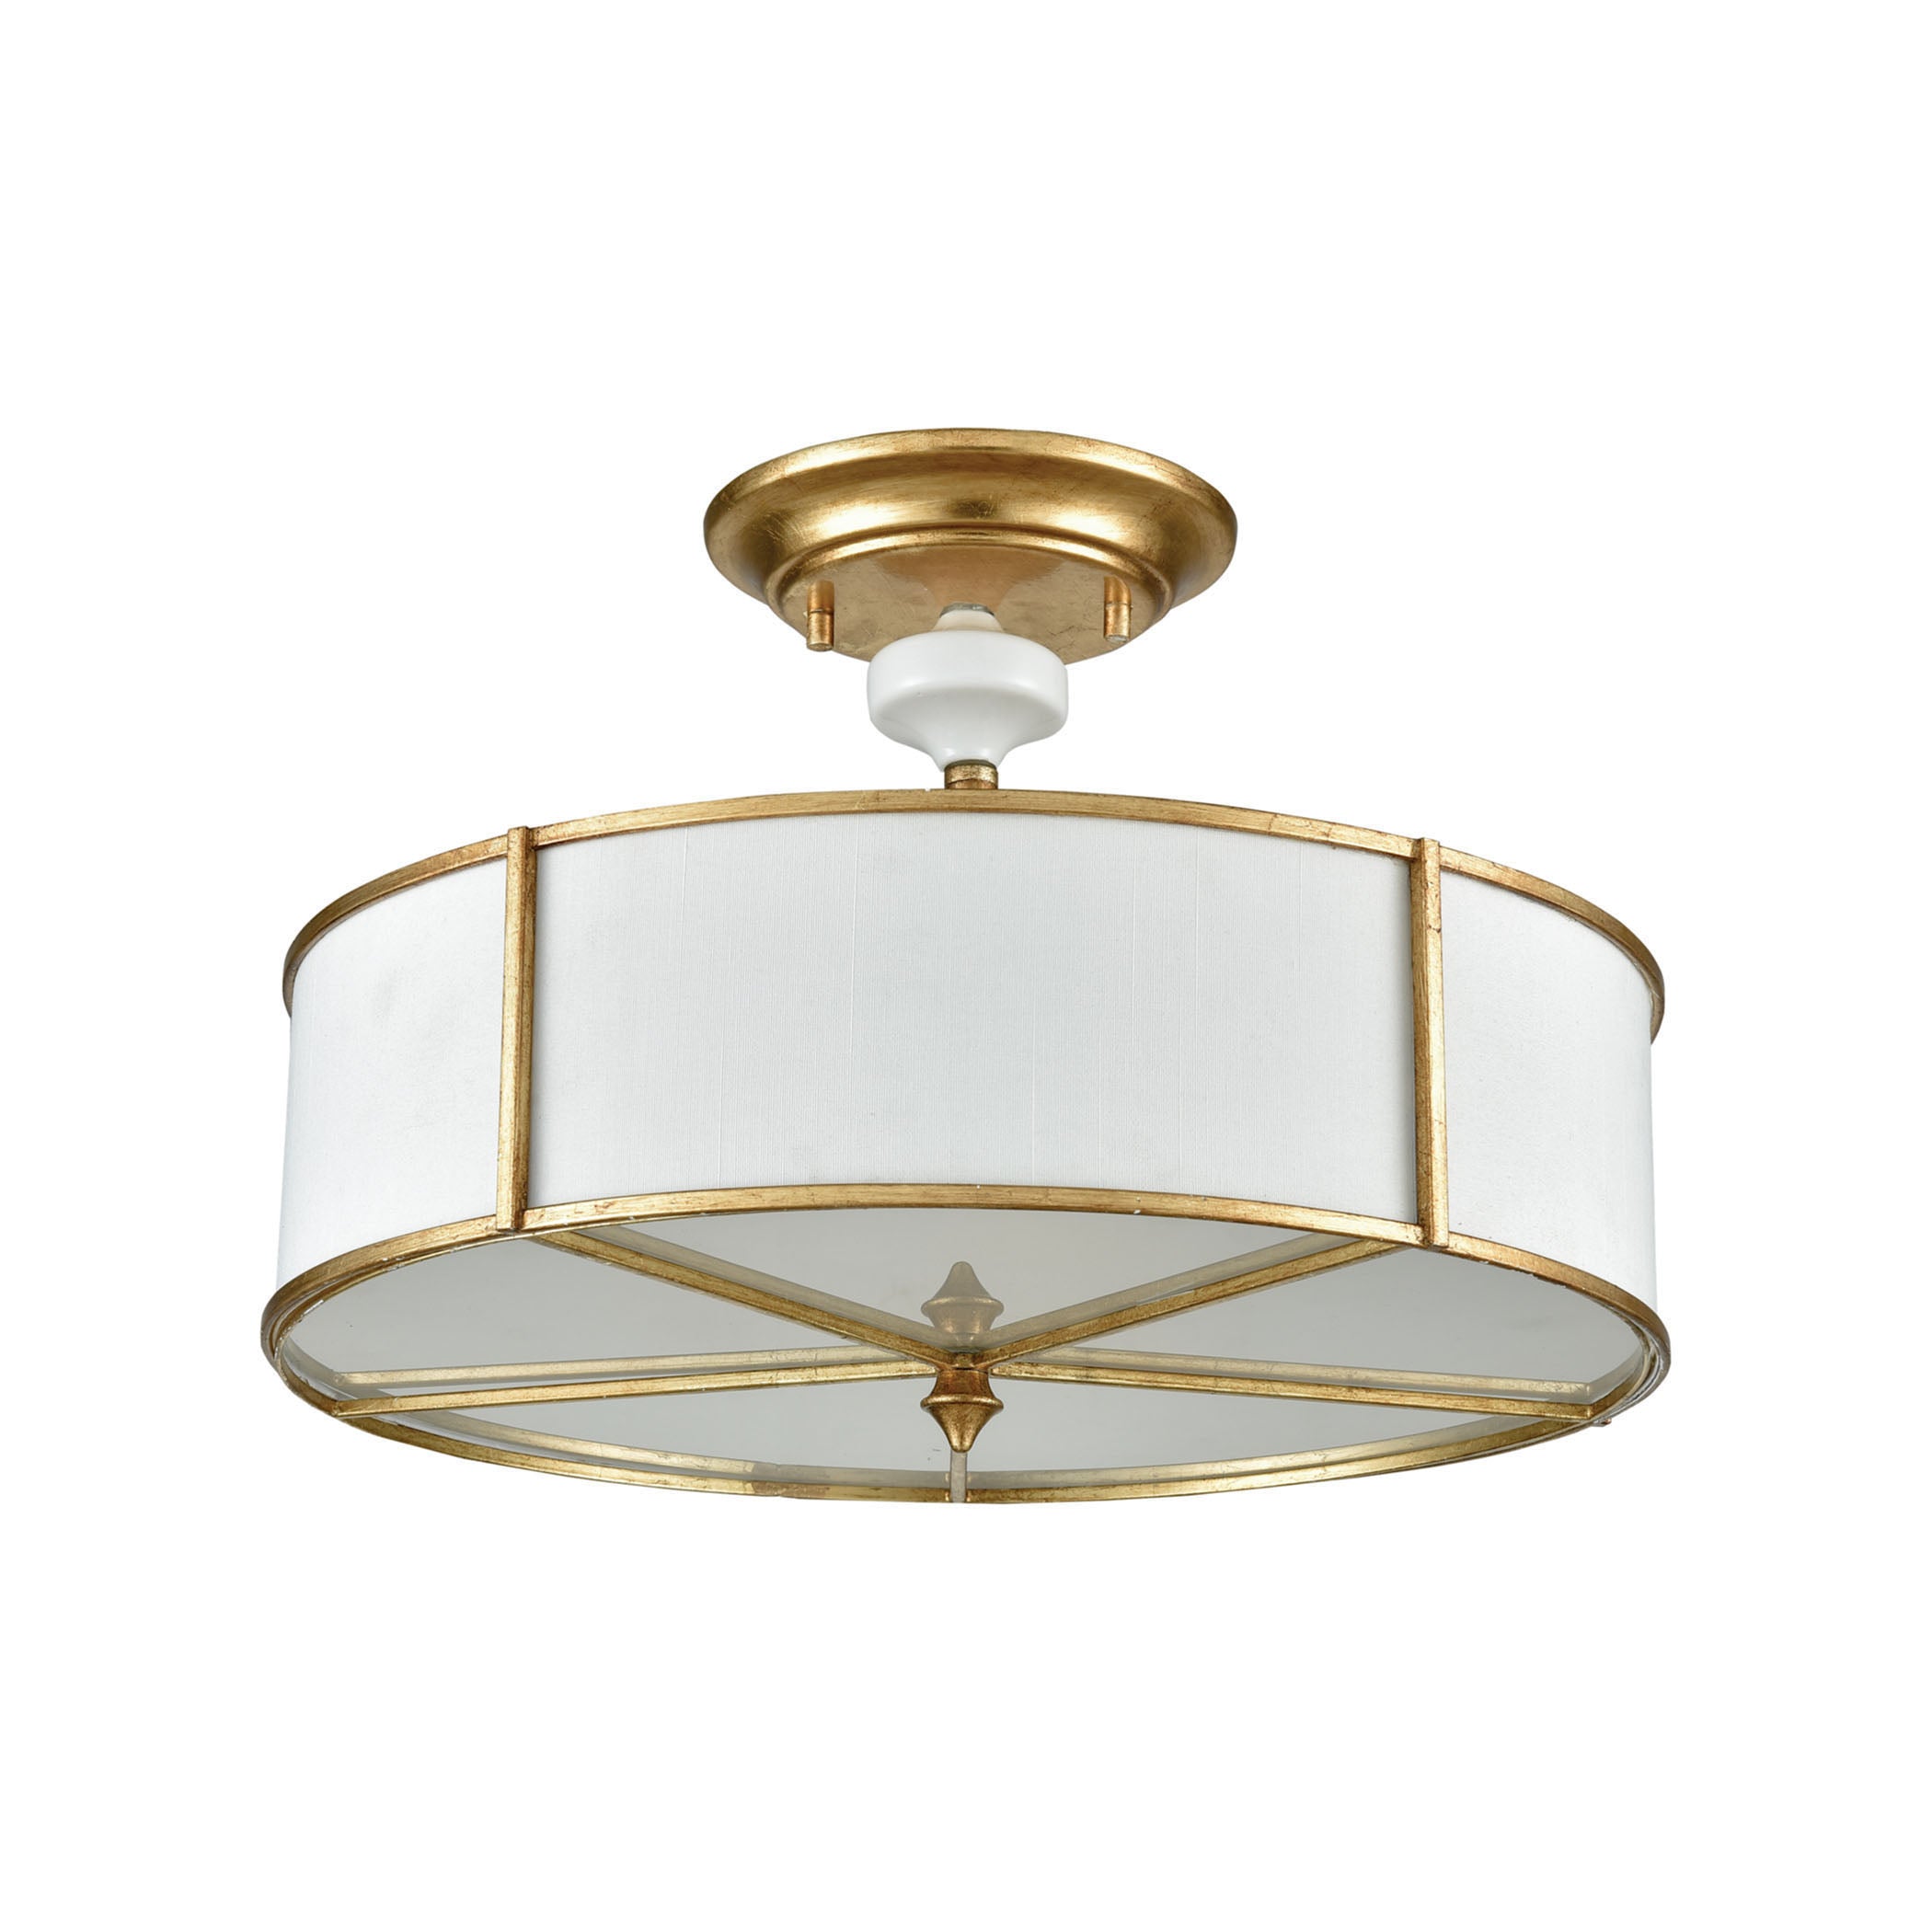 ELK Lighting 33052/3 Ceramique 3-Light Semi Flush in Antique Gold Leaf with White Fabric Shade and Frosted Diffuser